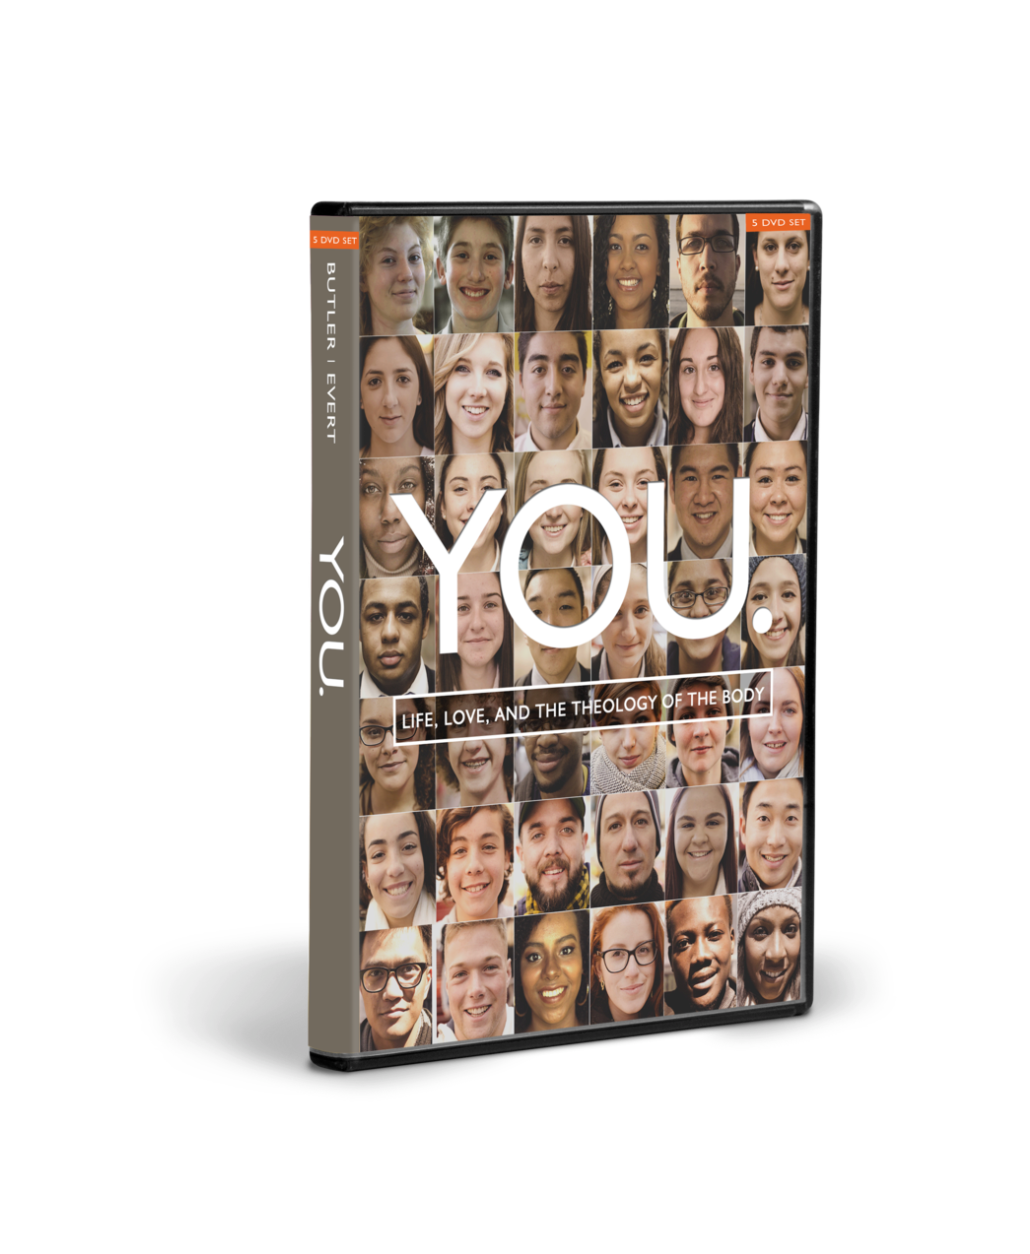 You: Life, Love, and the Theology of the Body – DVD Set